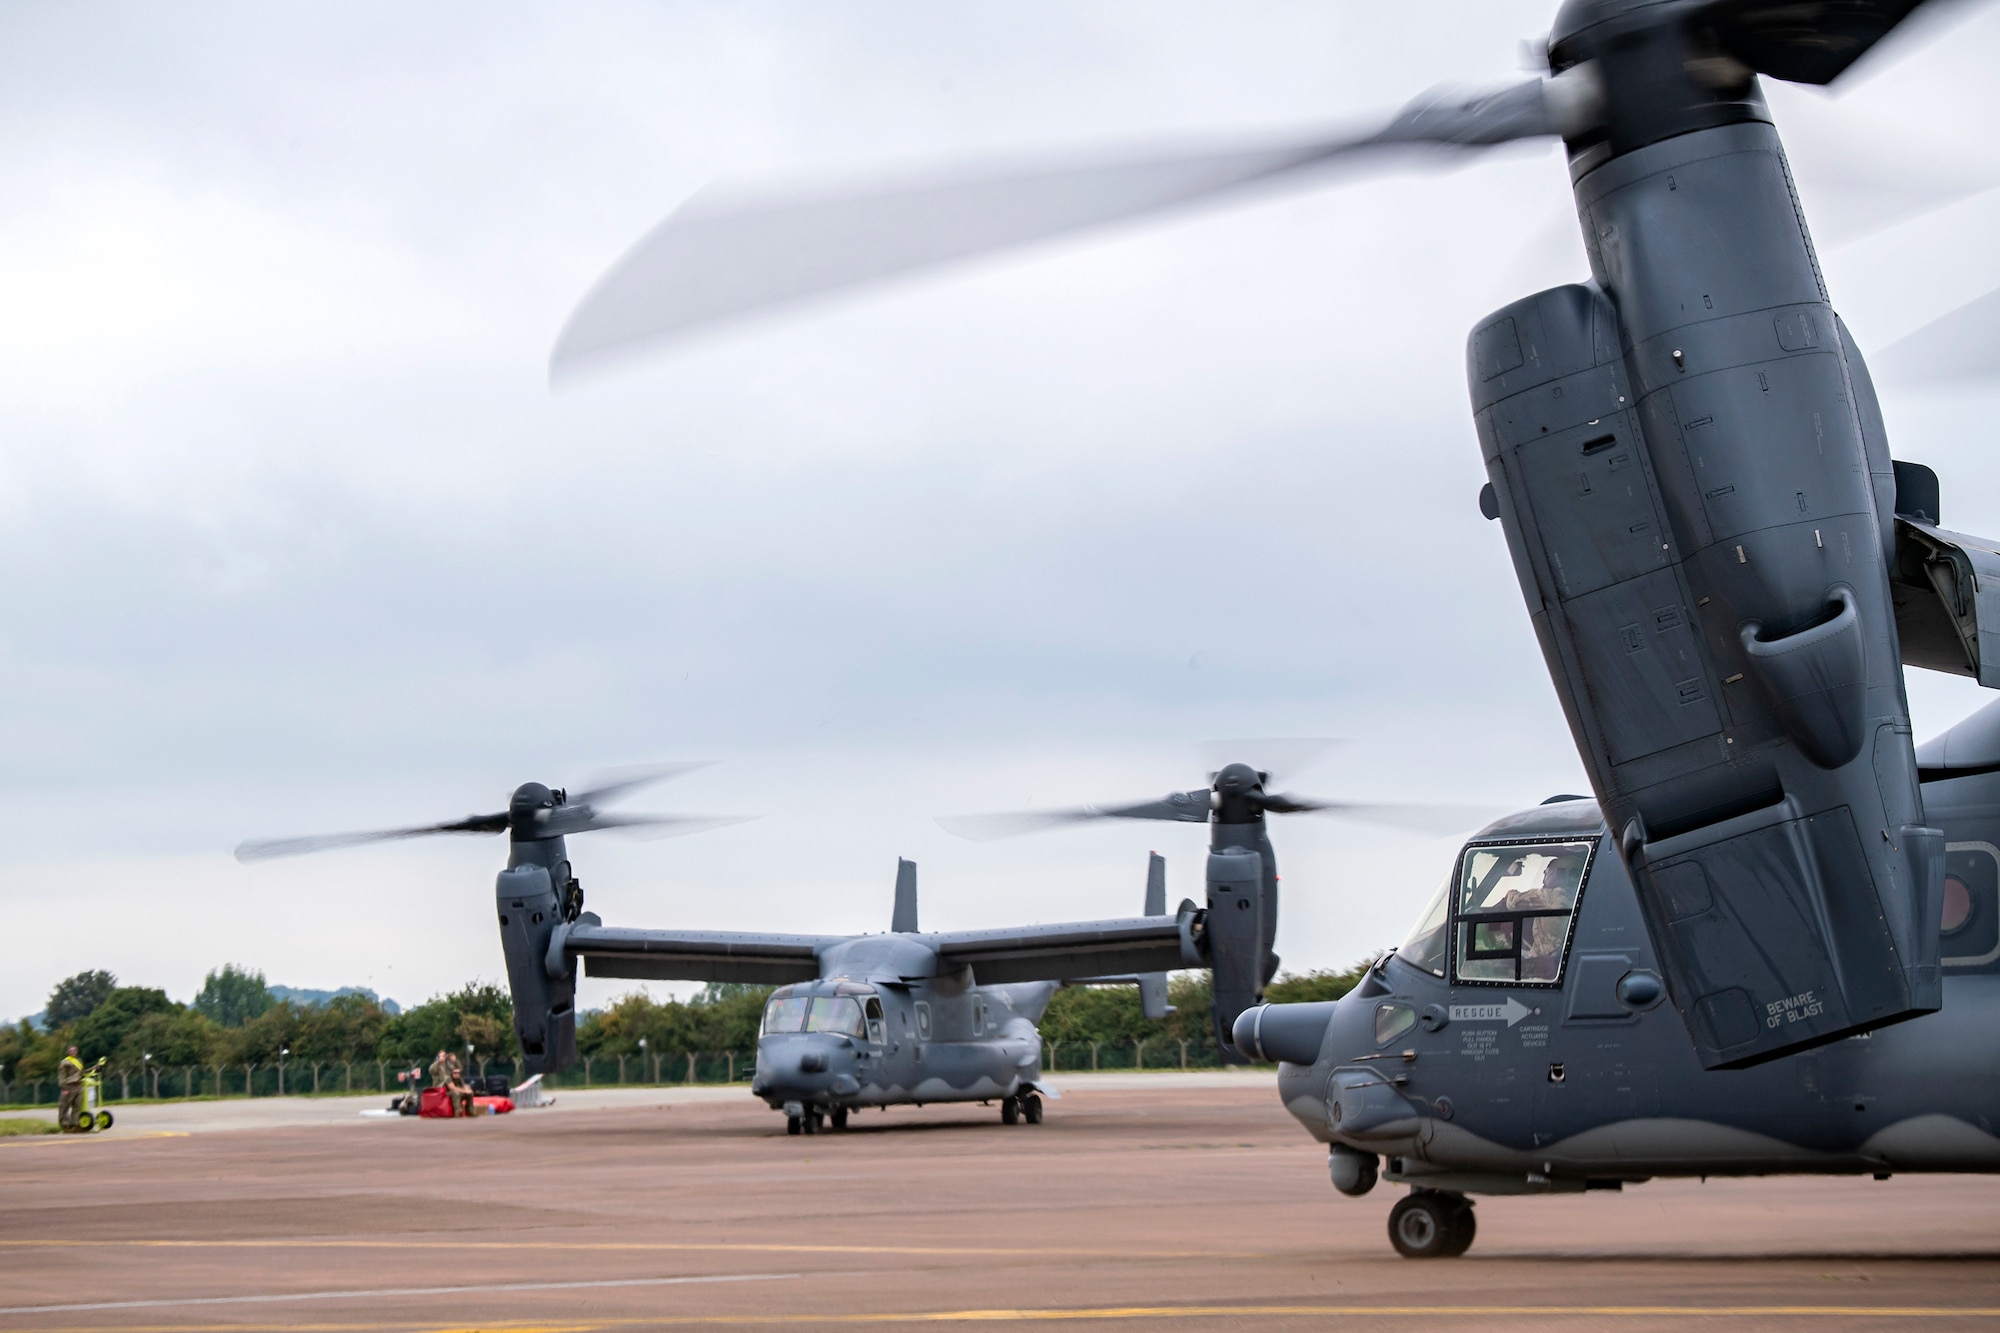 Two CV-22A Ospreys assigned to the 352d Special Operations Wing prepare to take off during an Agile Combat Employment exercise at RAF Fairford, England, Sept. 13, 2021. The exercise enables U.S. forces in Europe to operate from locations with varying levels of capacity and support. This further ensures Airmen and aircrews are postured to deliver lethal combat power across the full spectrum of military operations.(U.S. Air Force photo by Senior Airman Eugene Oliver)